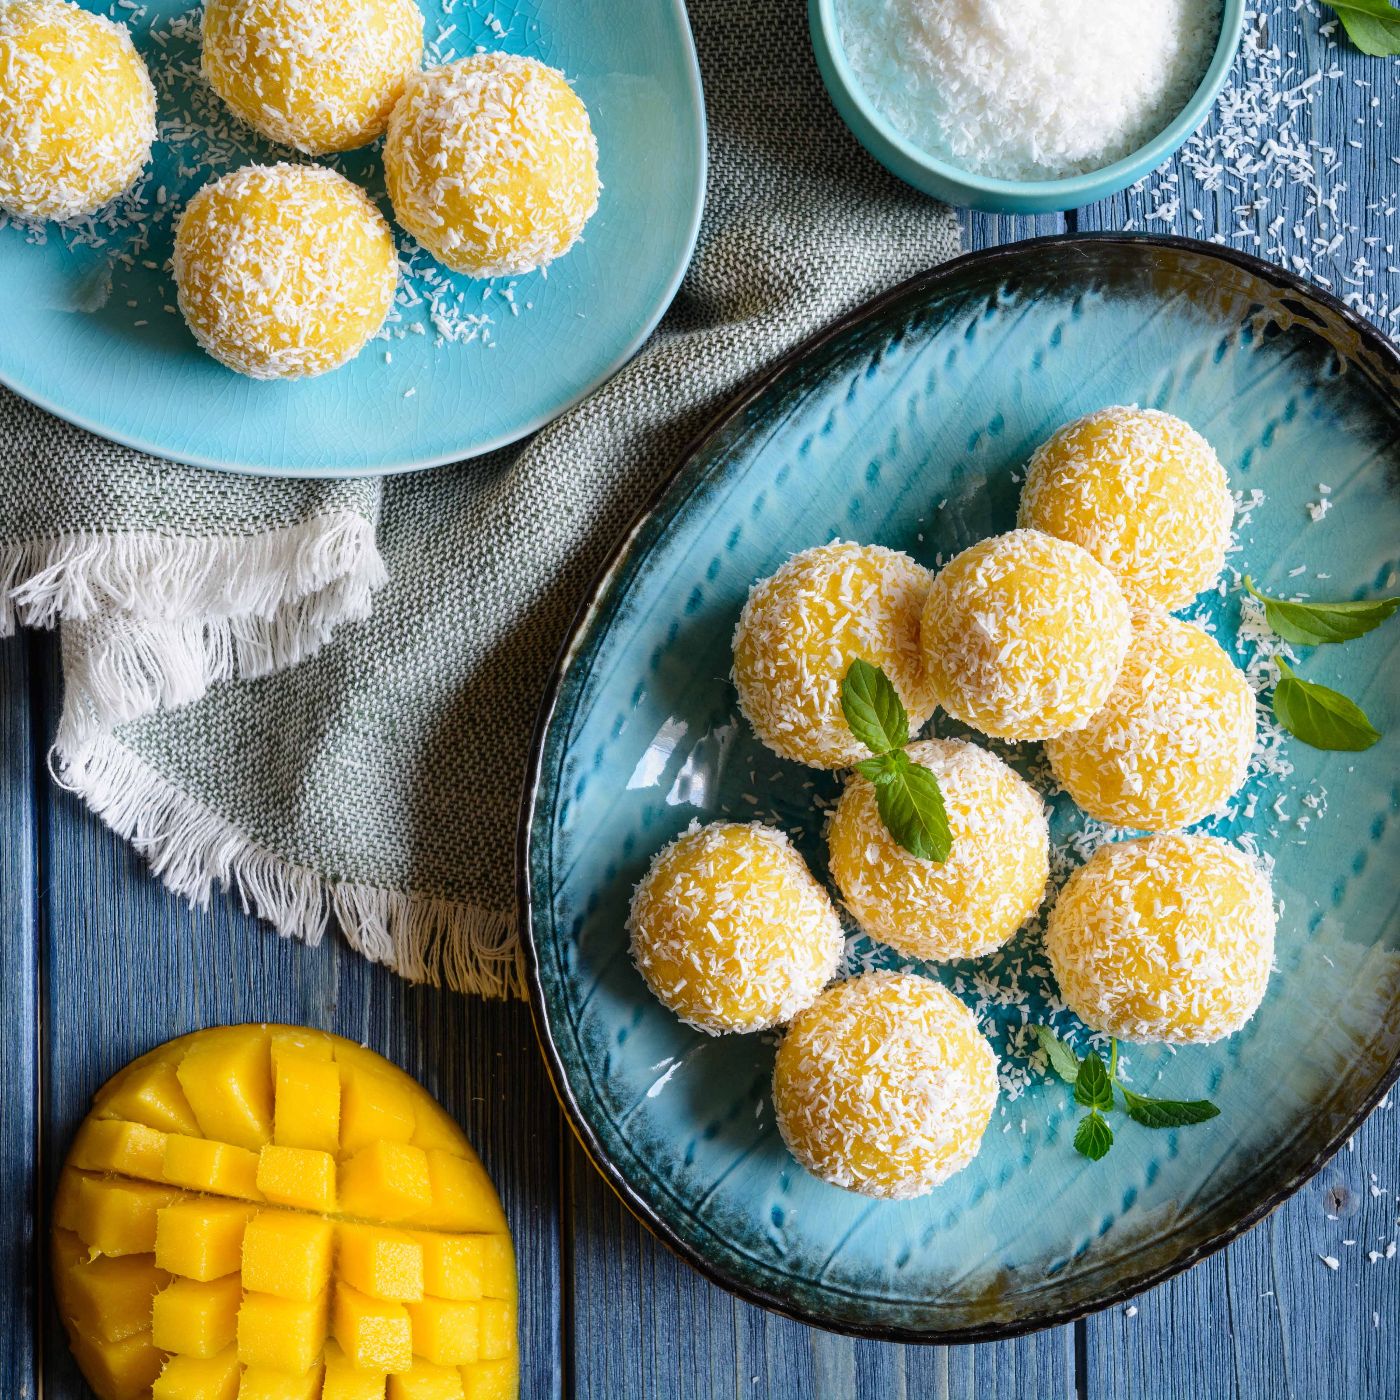 Mango-Coconut-Ladoo--sweet-balls-made-of-mango-puree,-desiccated-coconut-and-condensed-milk-1253126248_6000x4000 square.jpg